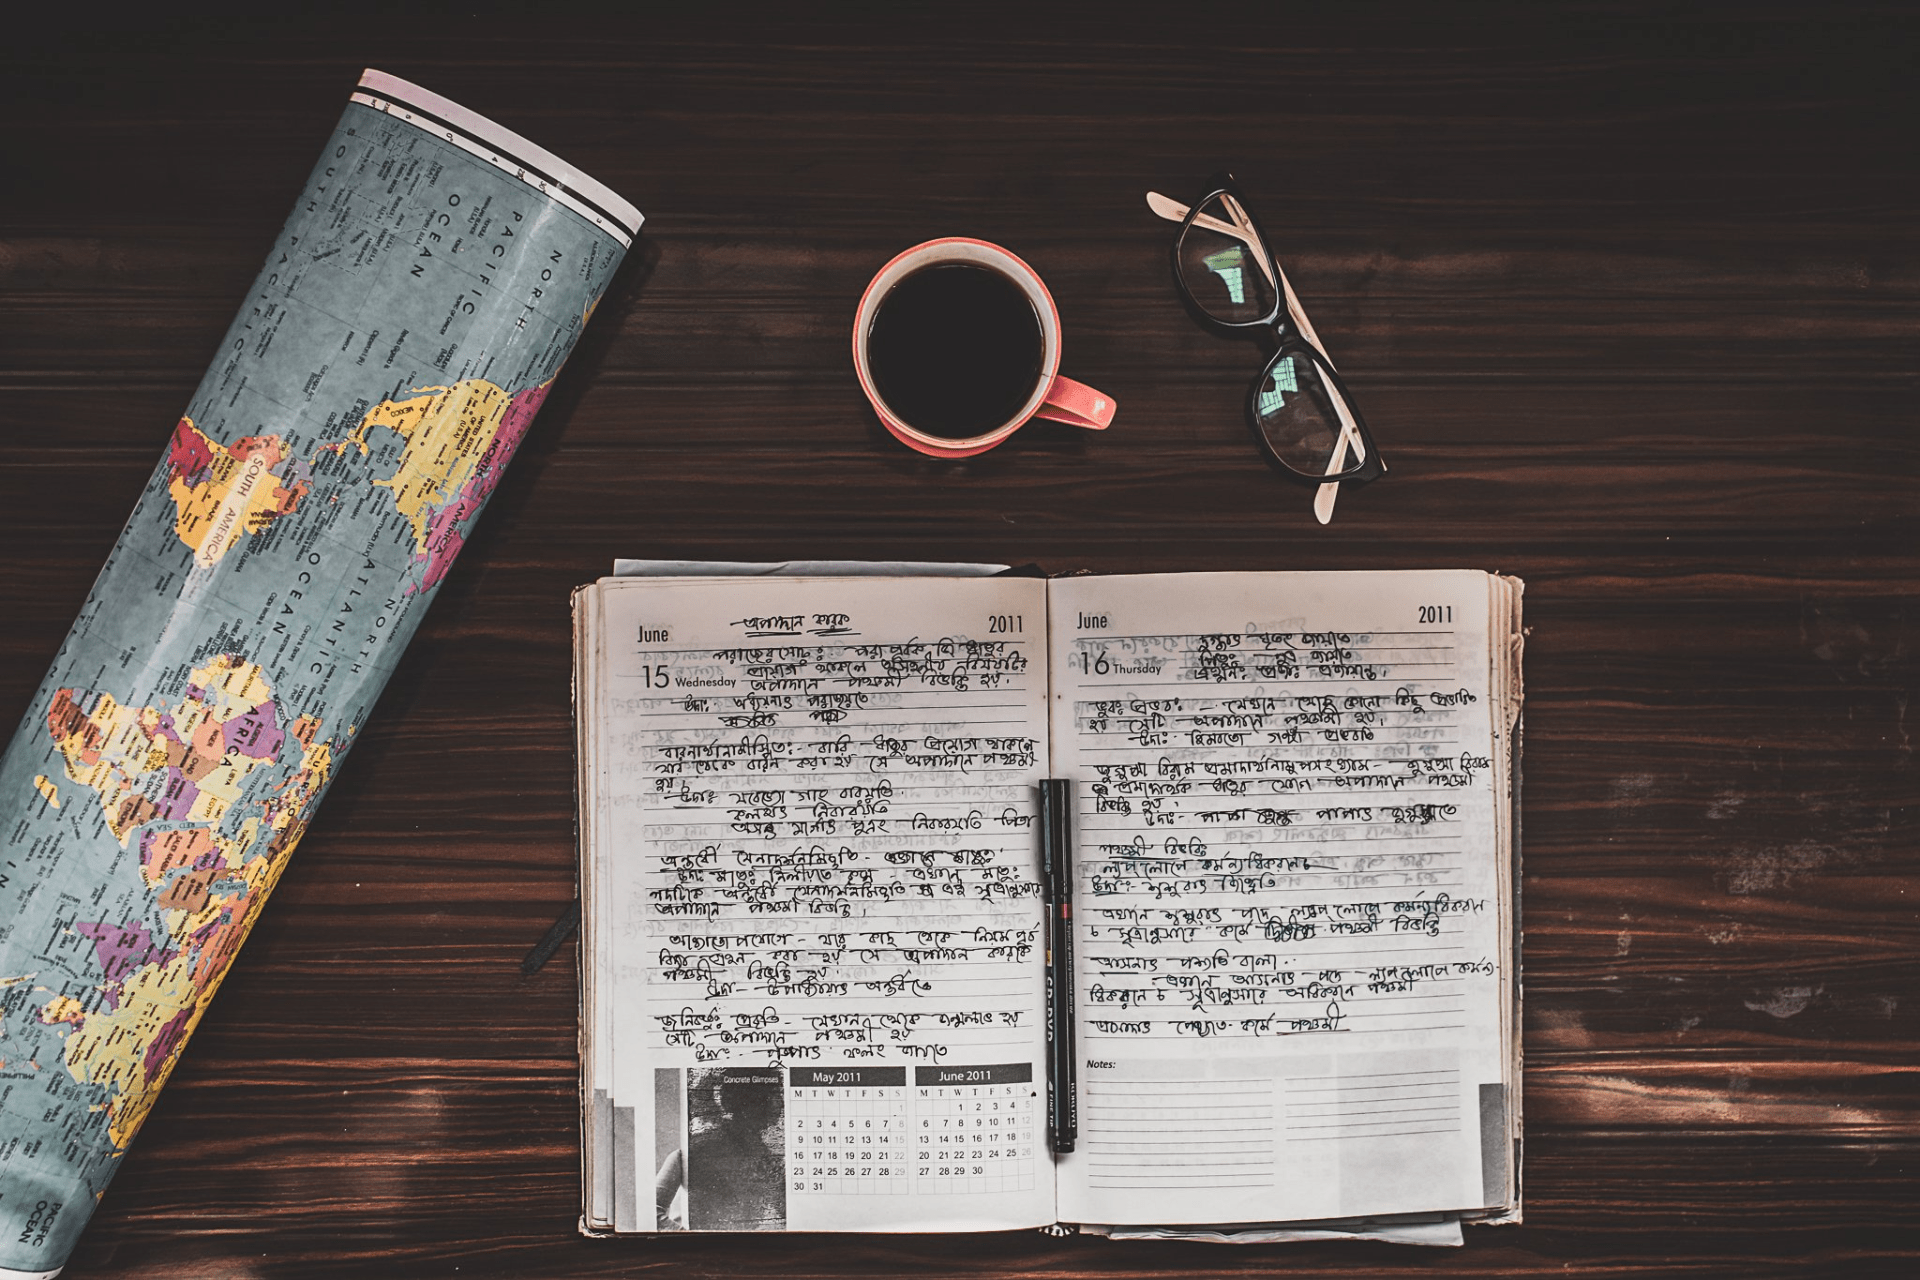 credit: Rahul Pandit. photograph capturing travel, notebook, glasses, coffee and a map, all laid out on a table